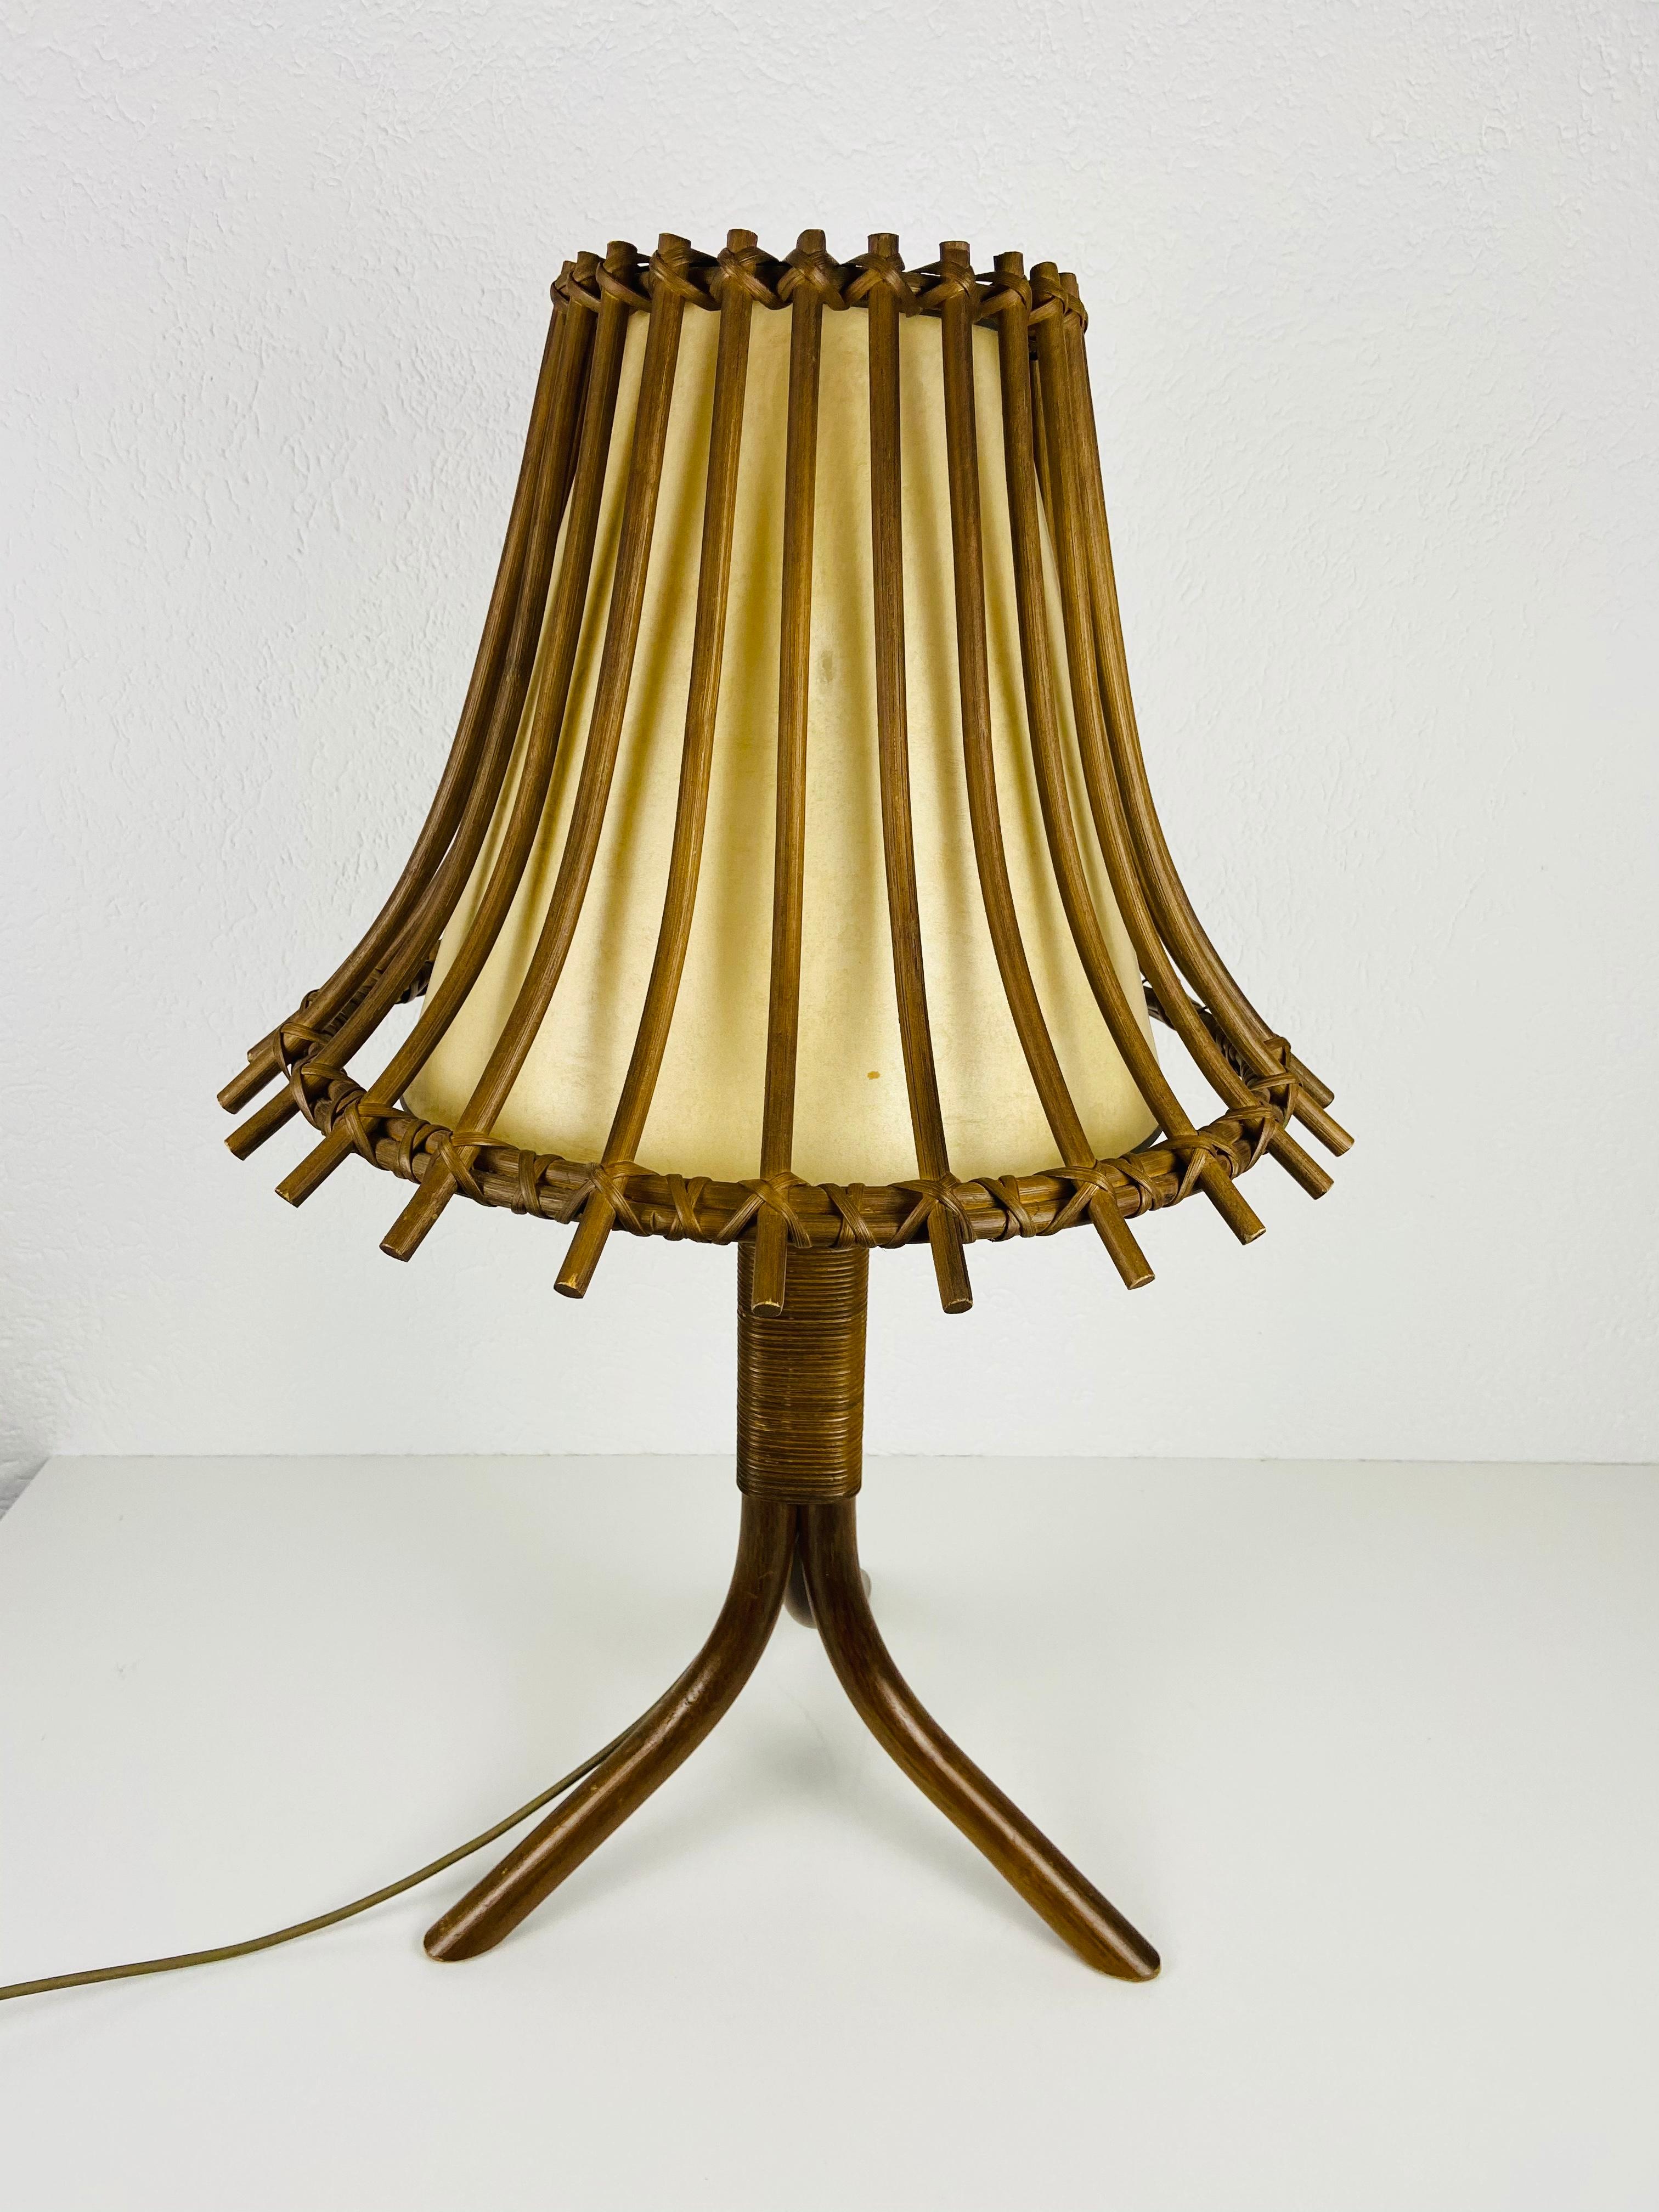 Midcentury Teak and Rattan Table Lamp, circa 1970 In Good Condition For Sale In Hagenbach, DE